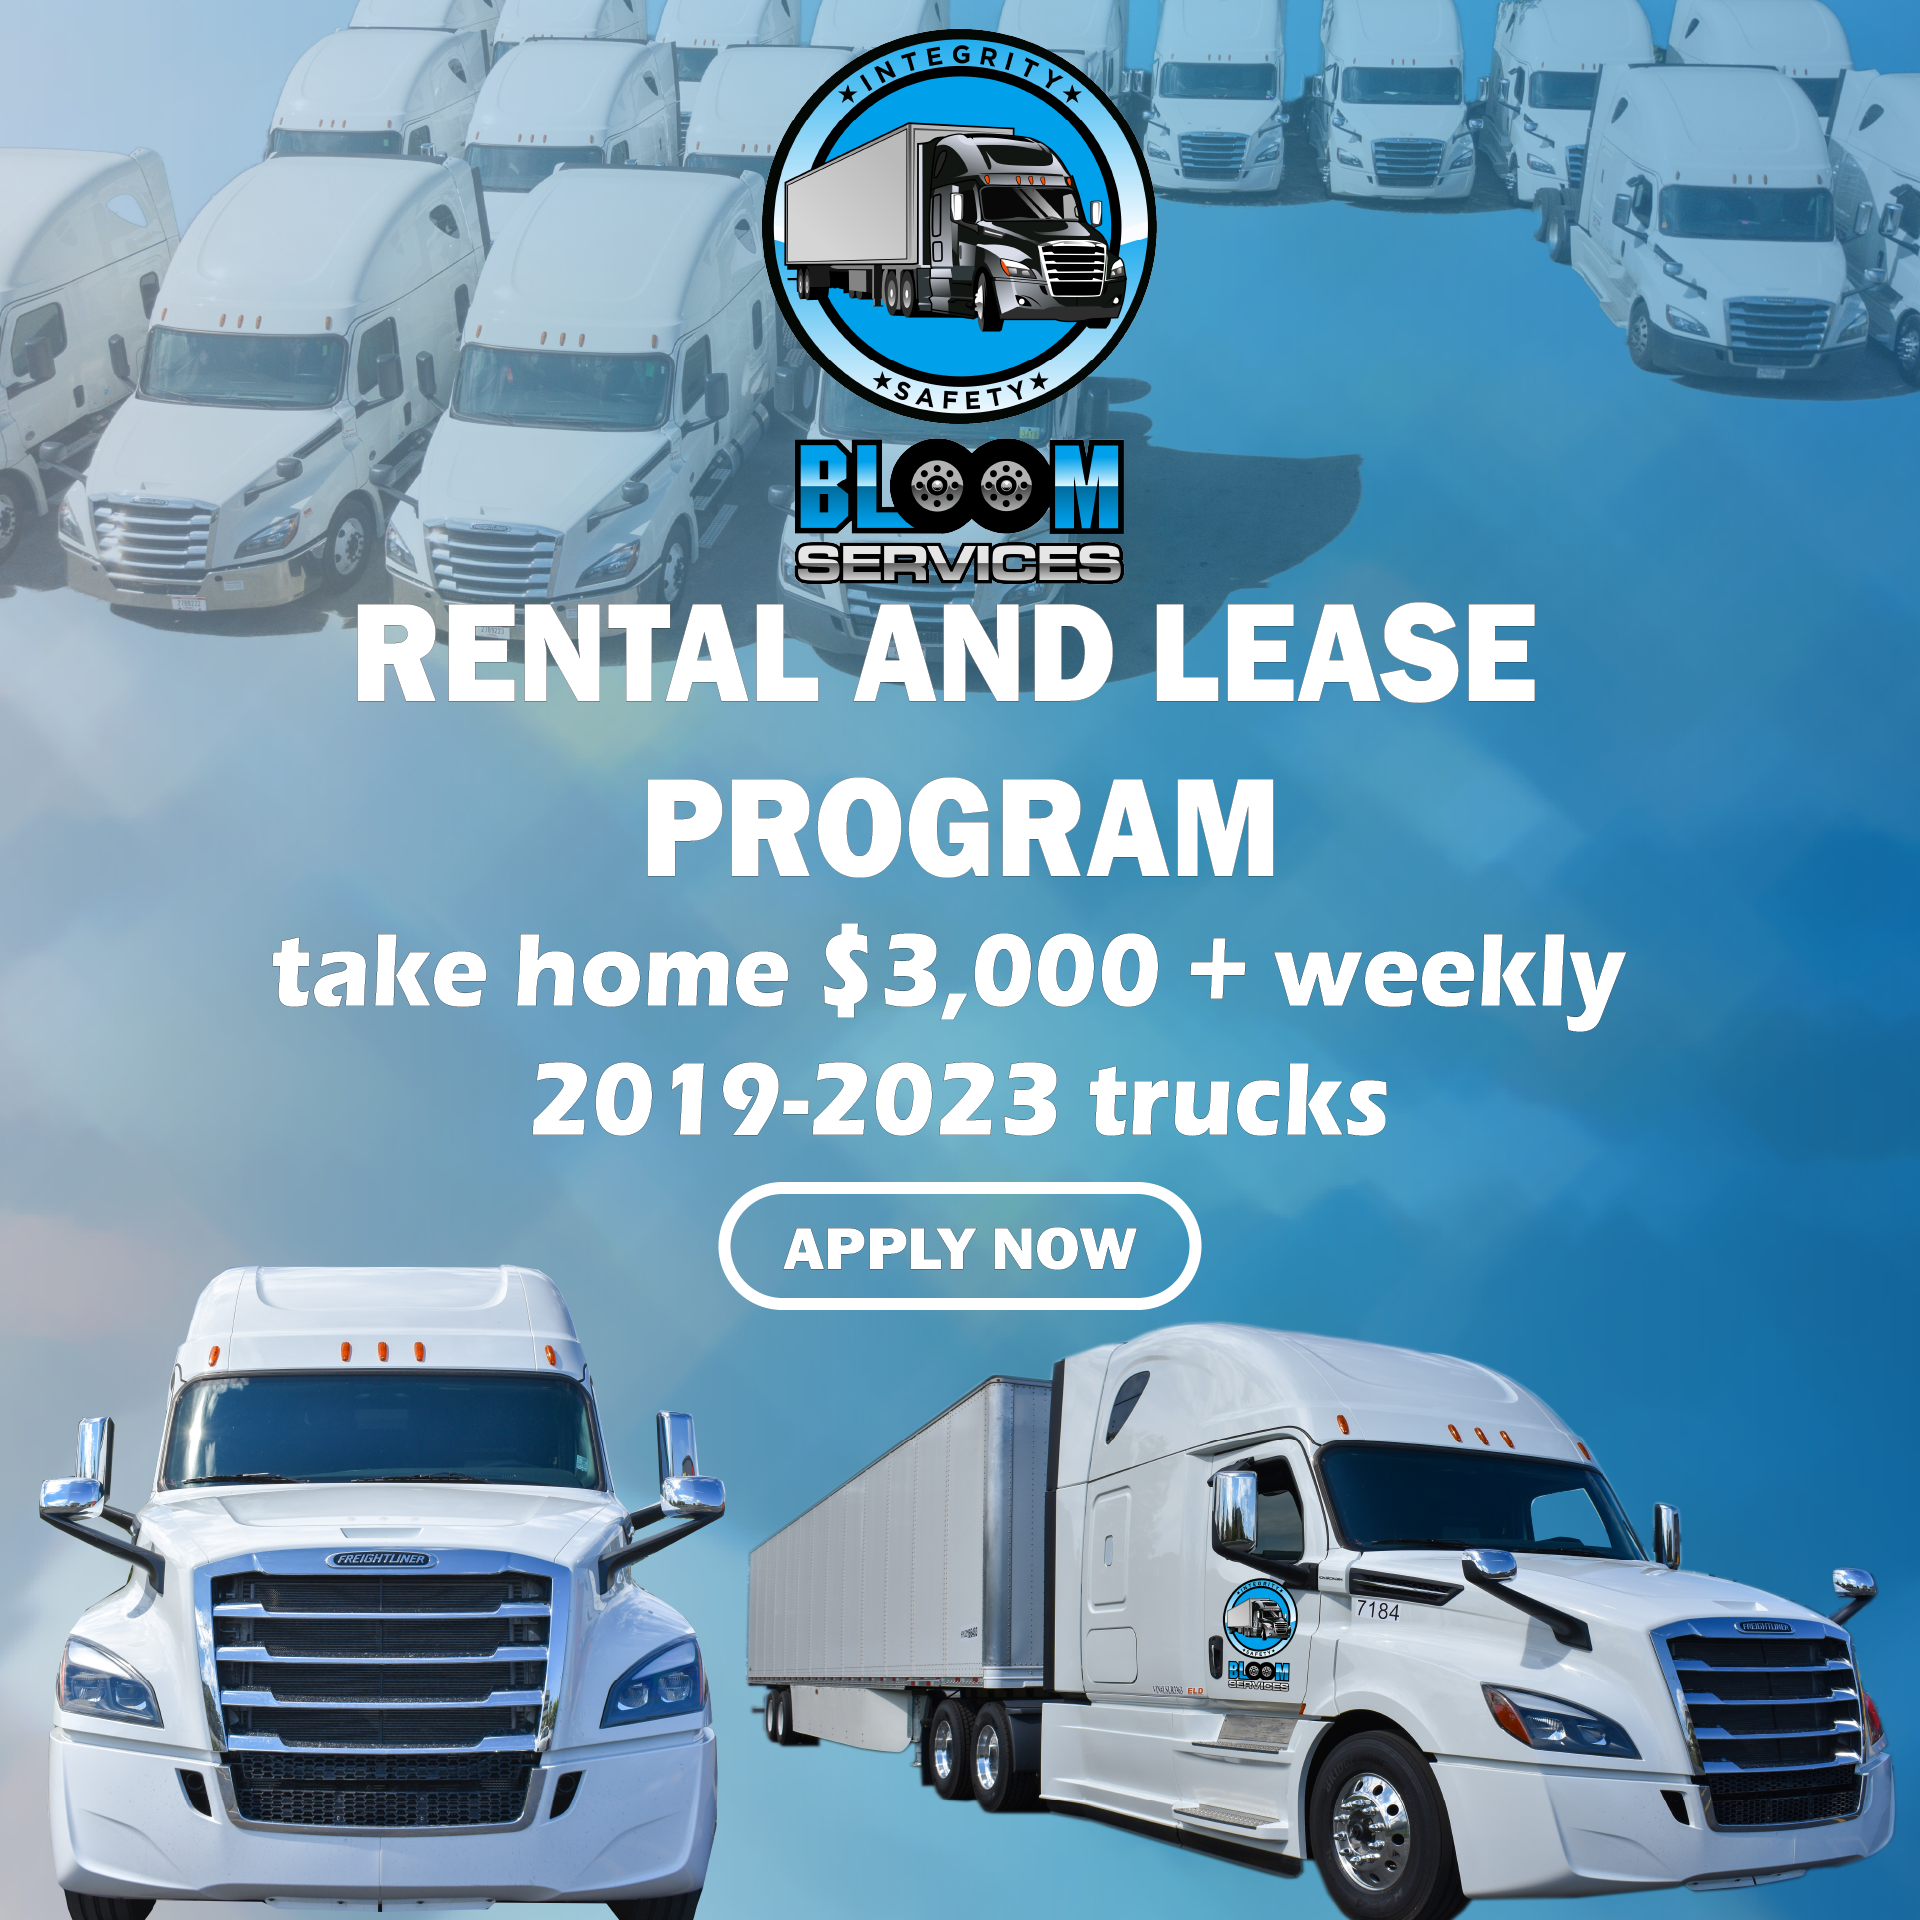 an advertisement for a rental and lease program